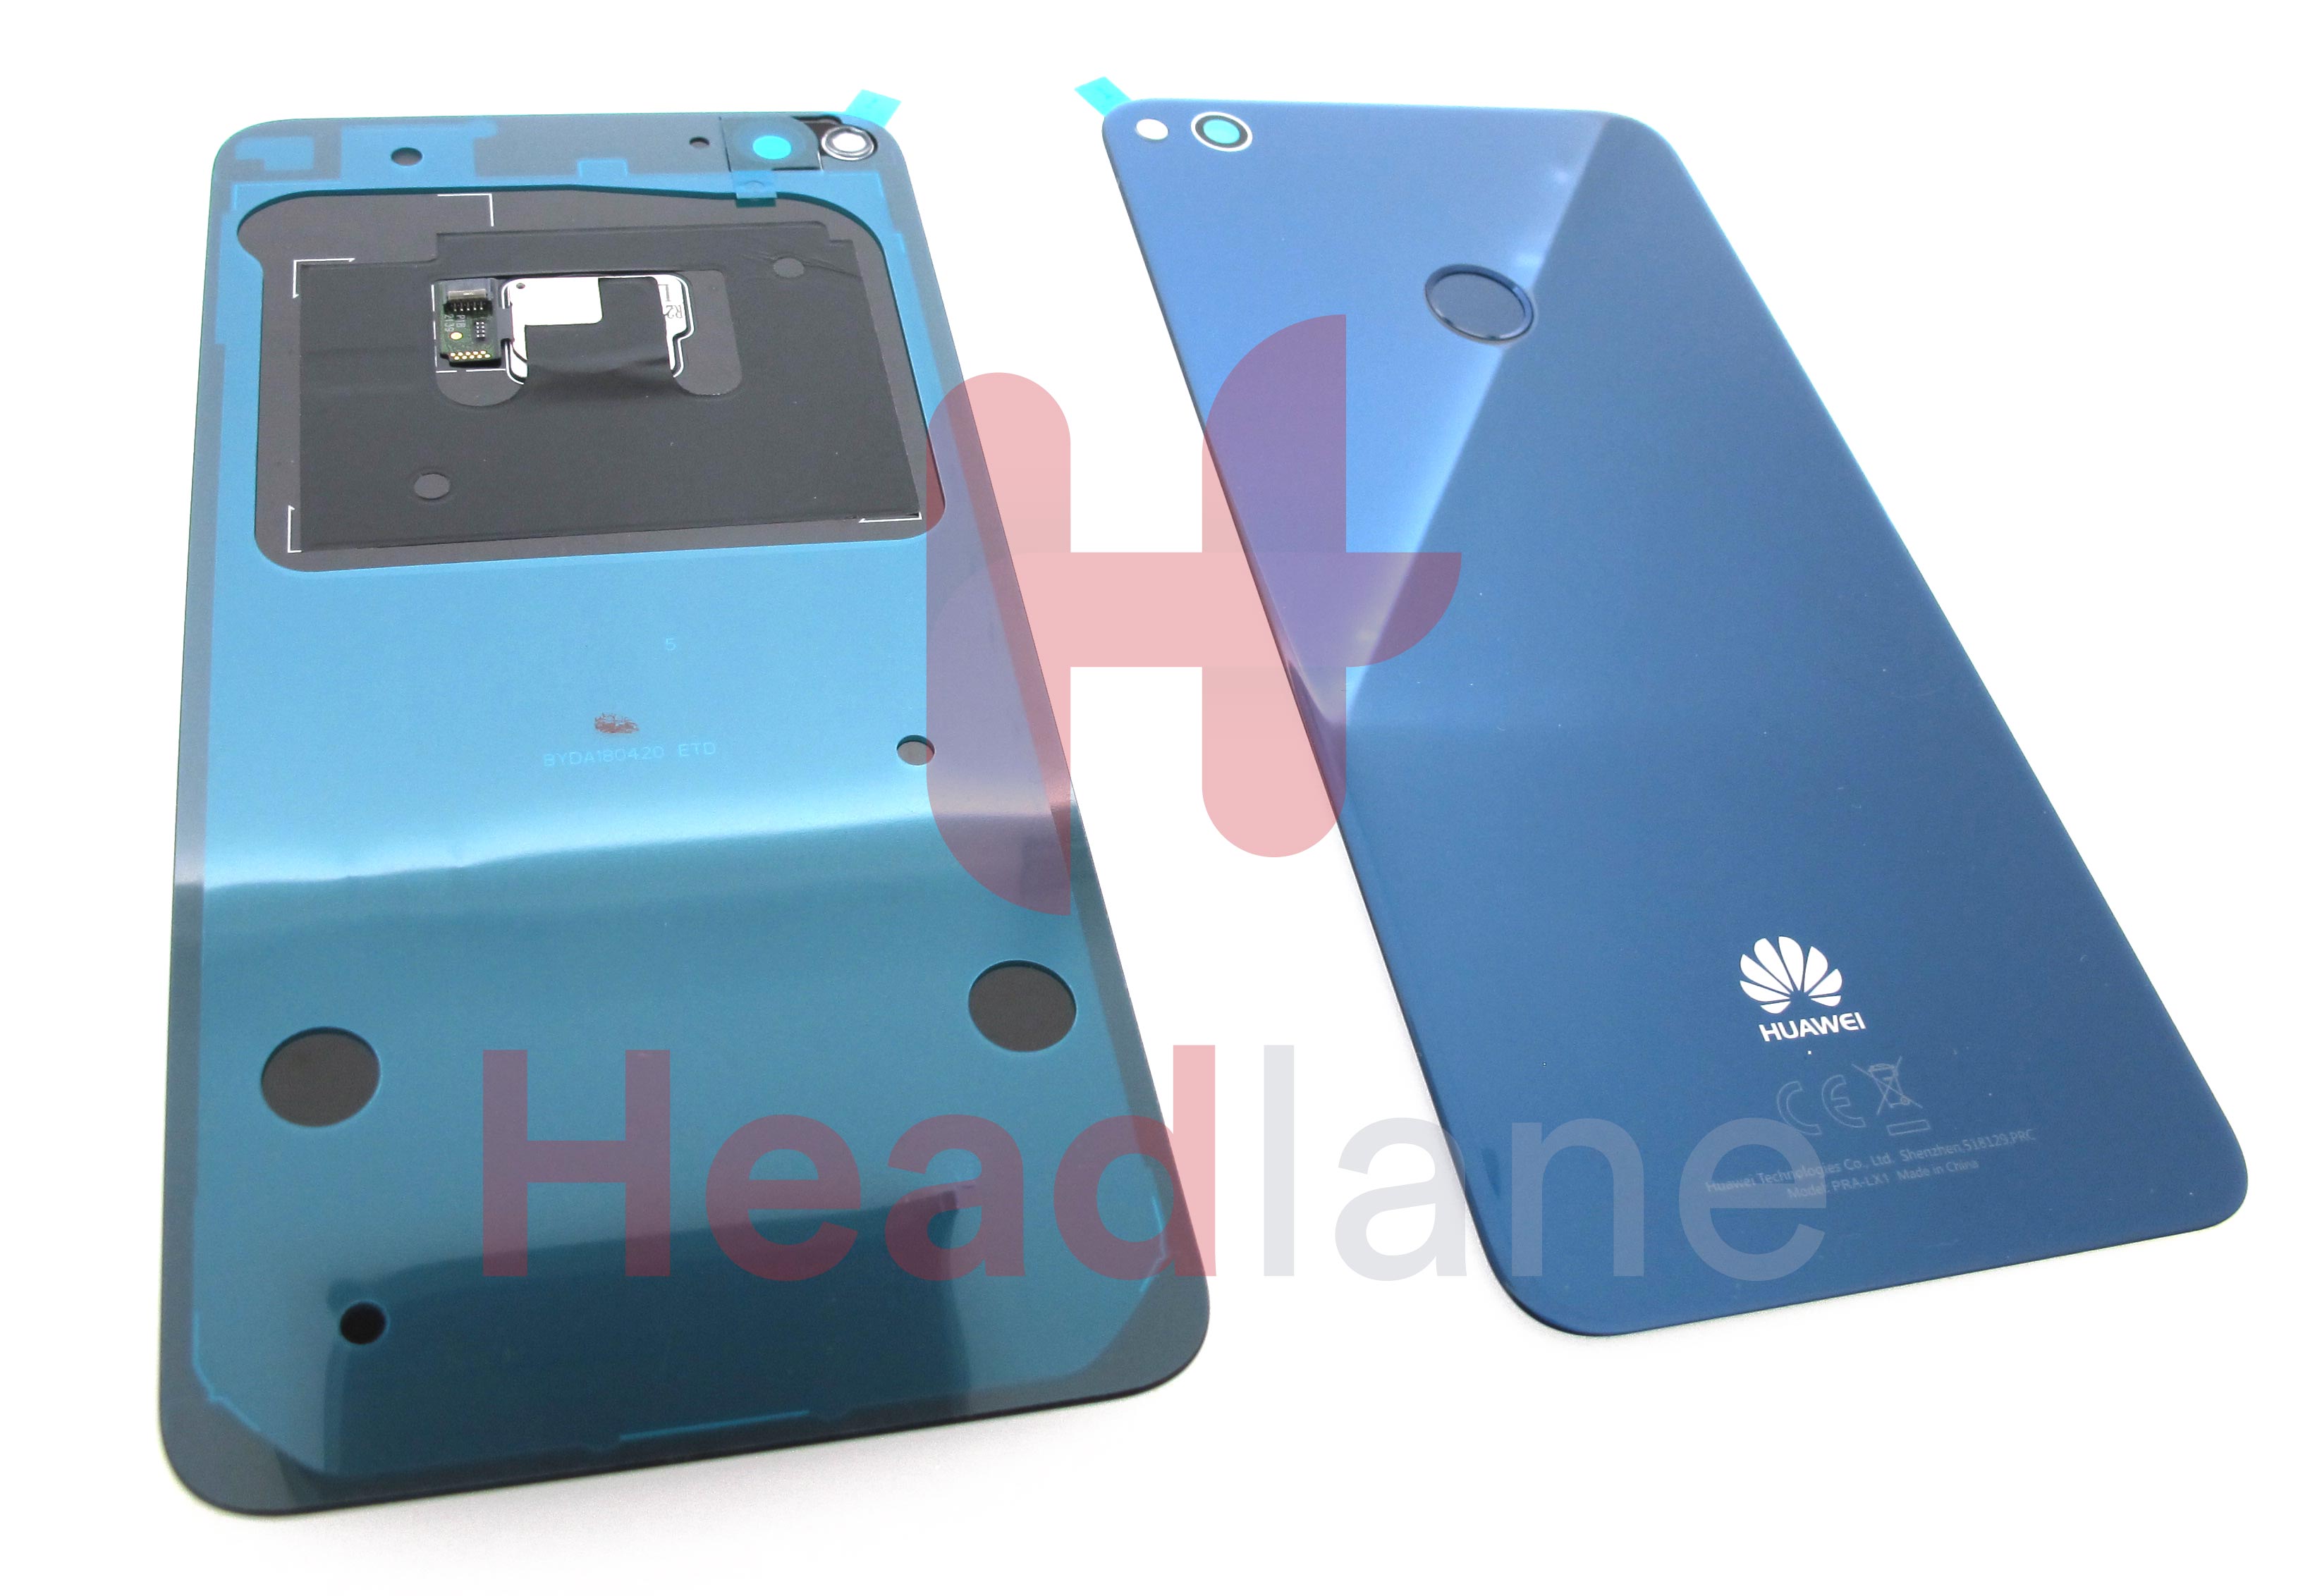 Huawei P8 Lite (2017) Back / Battery Cover - Blue